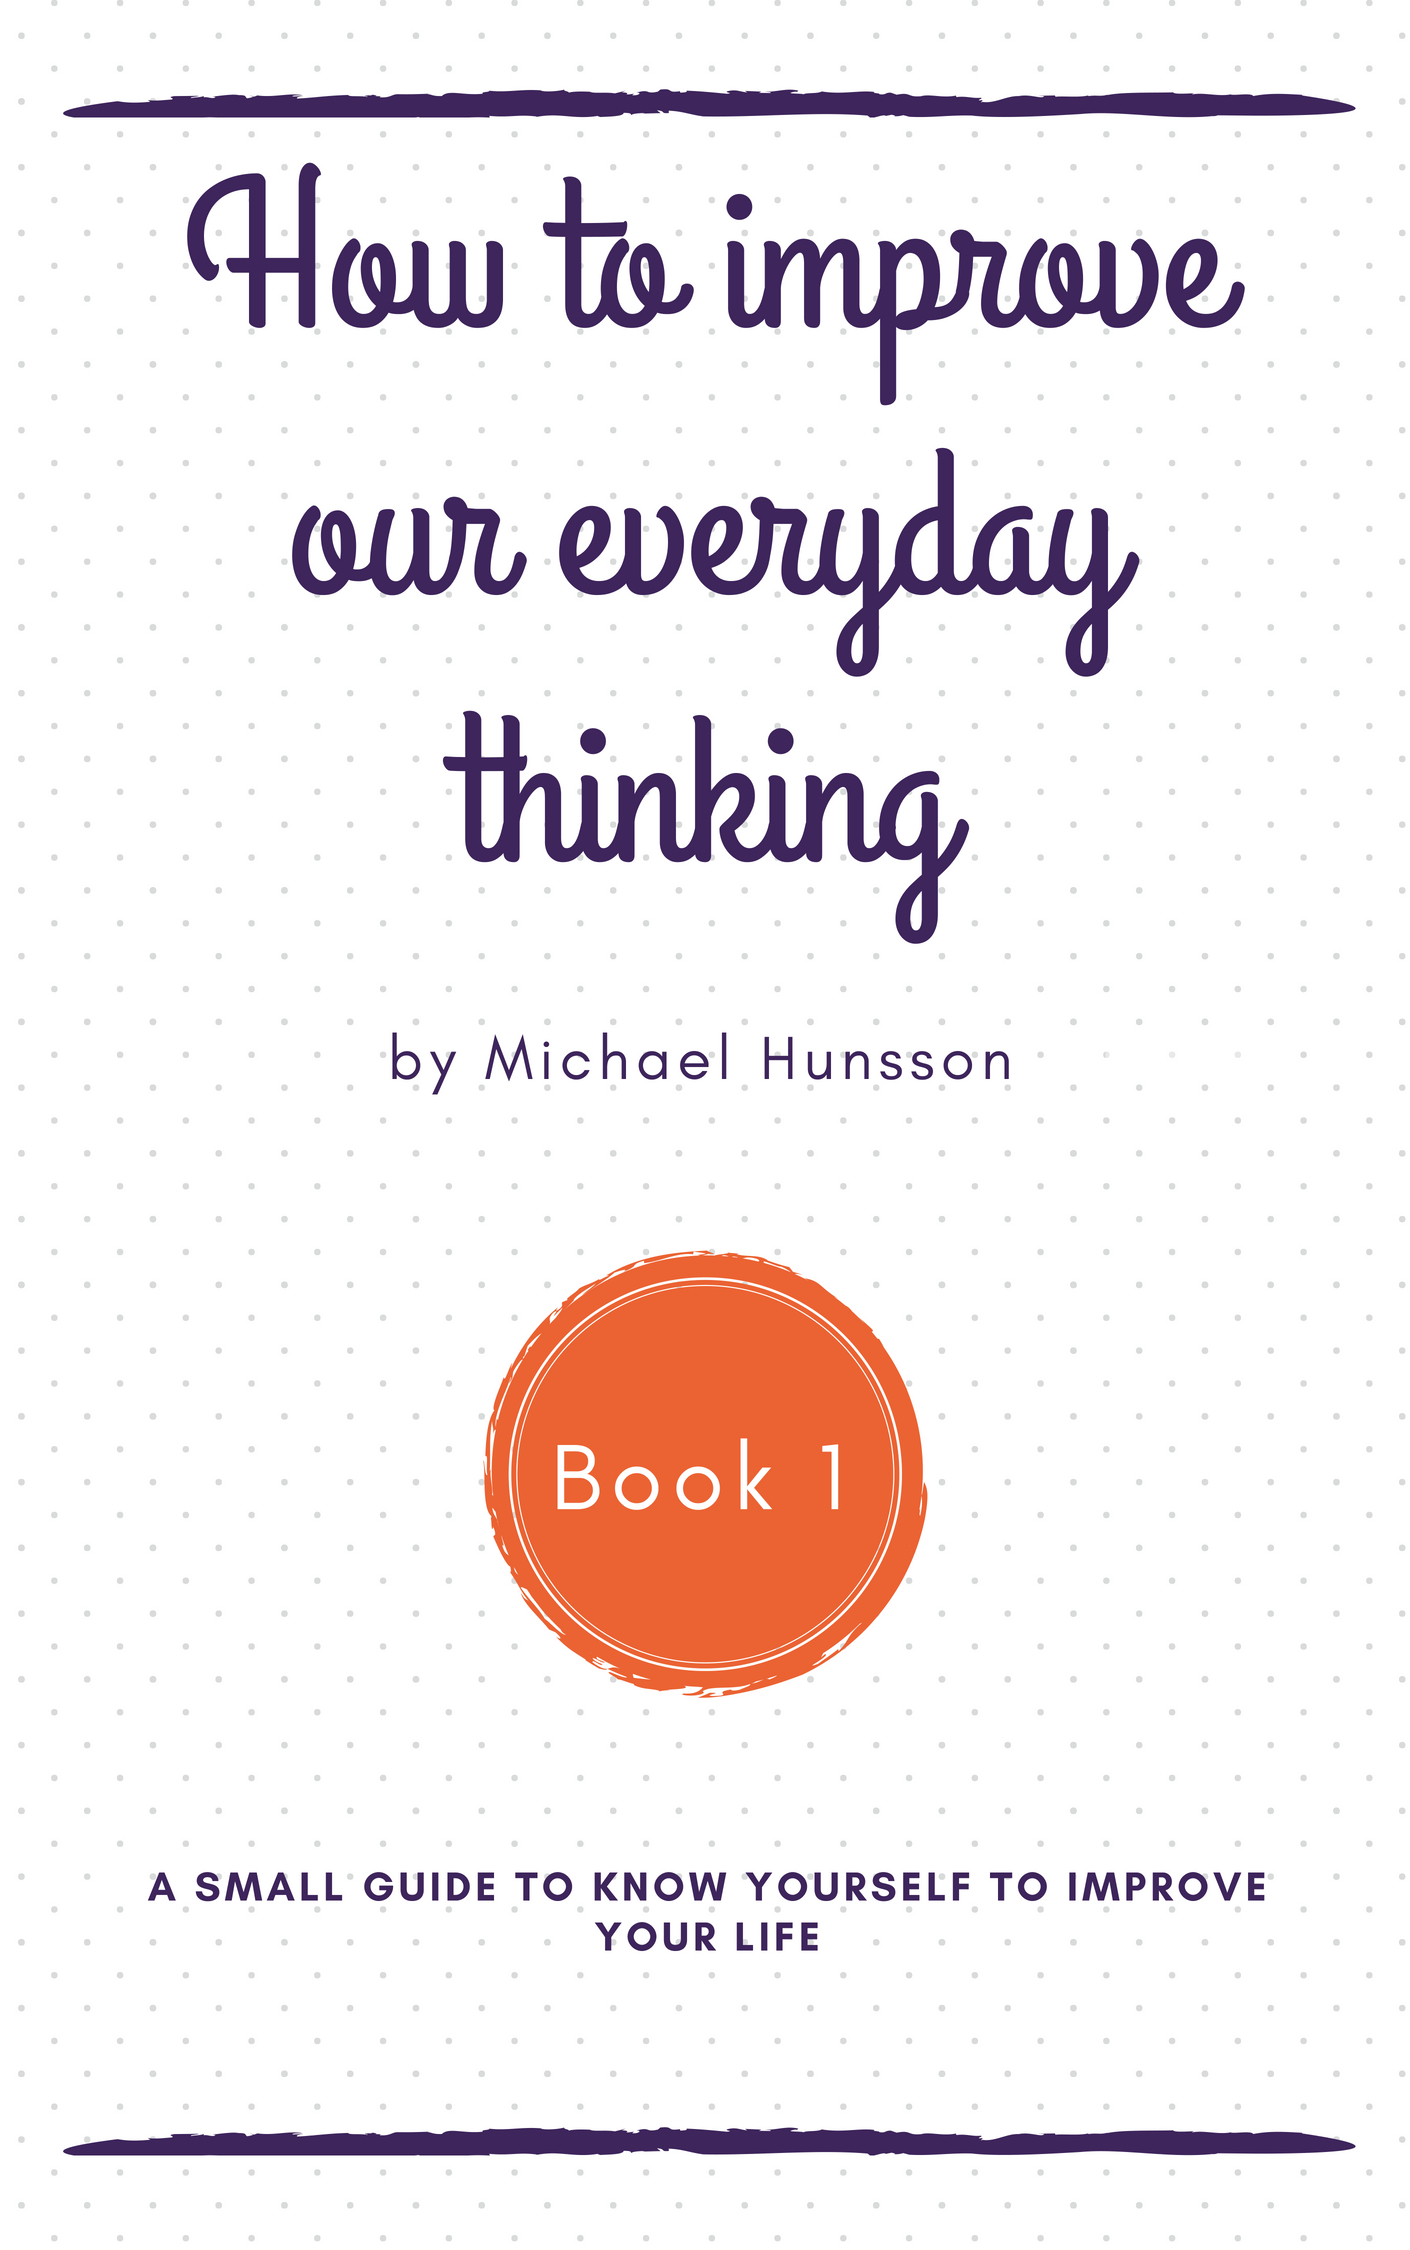 FREE: How to improve our everyday thinking-Book 1 by Michael Hunsson